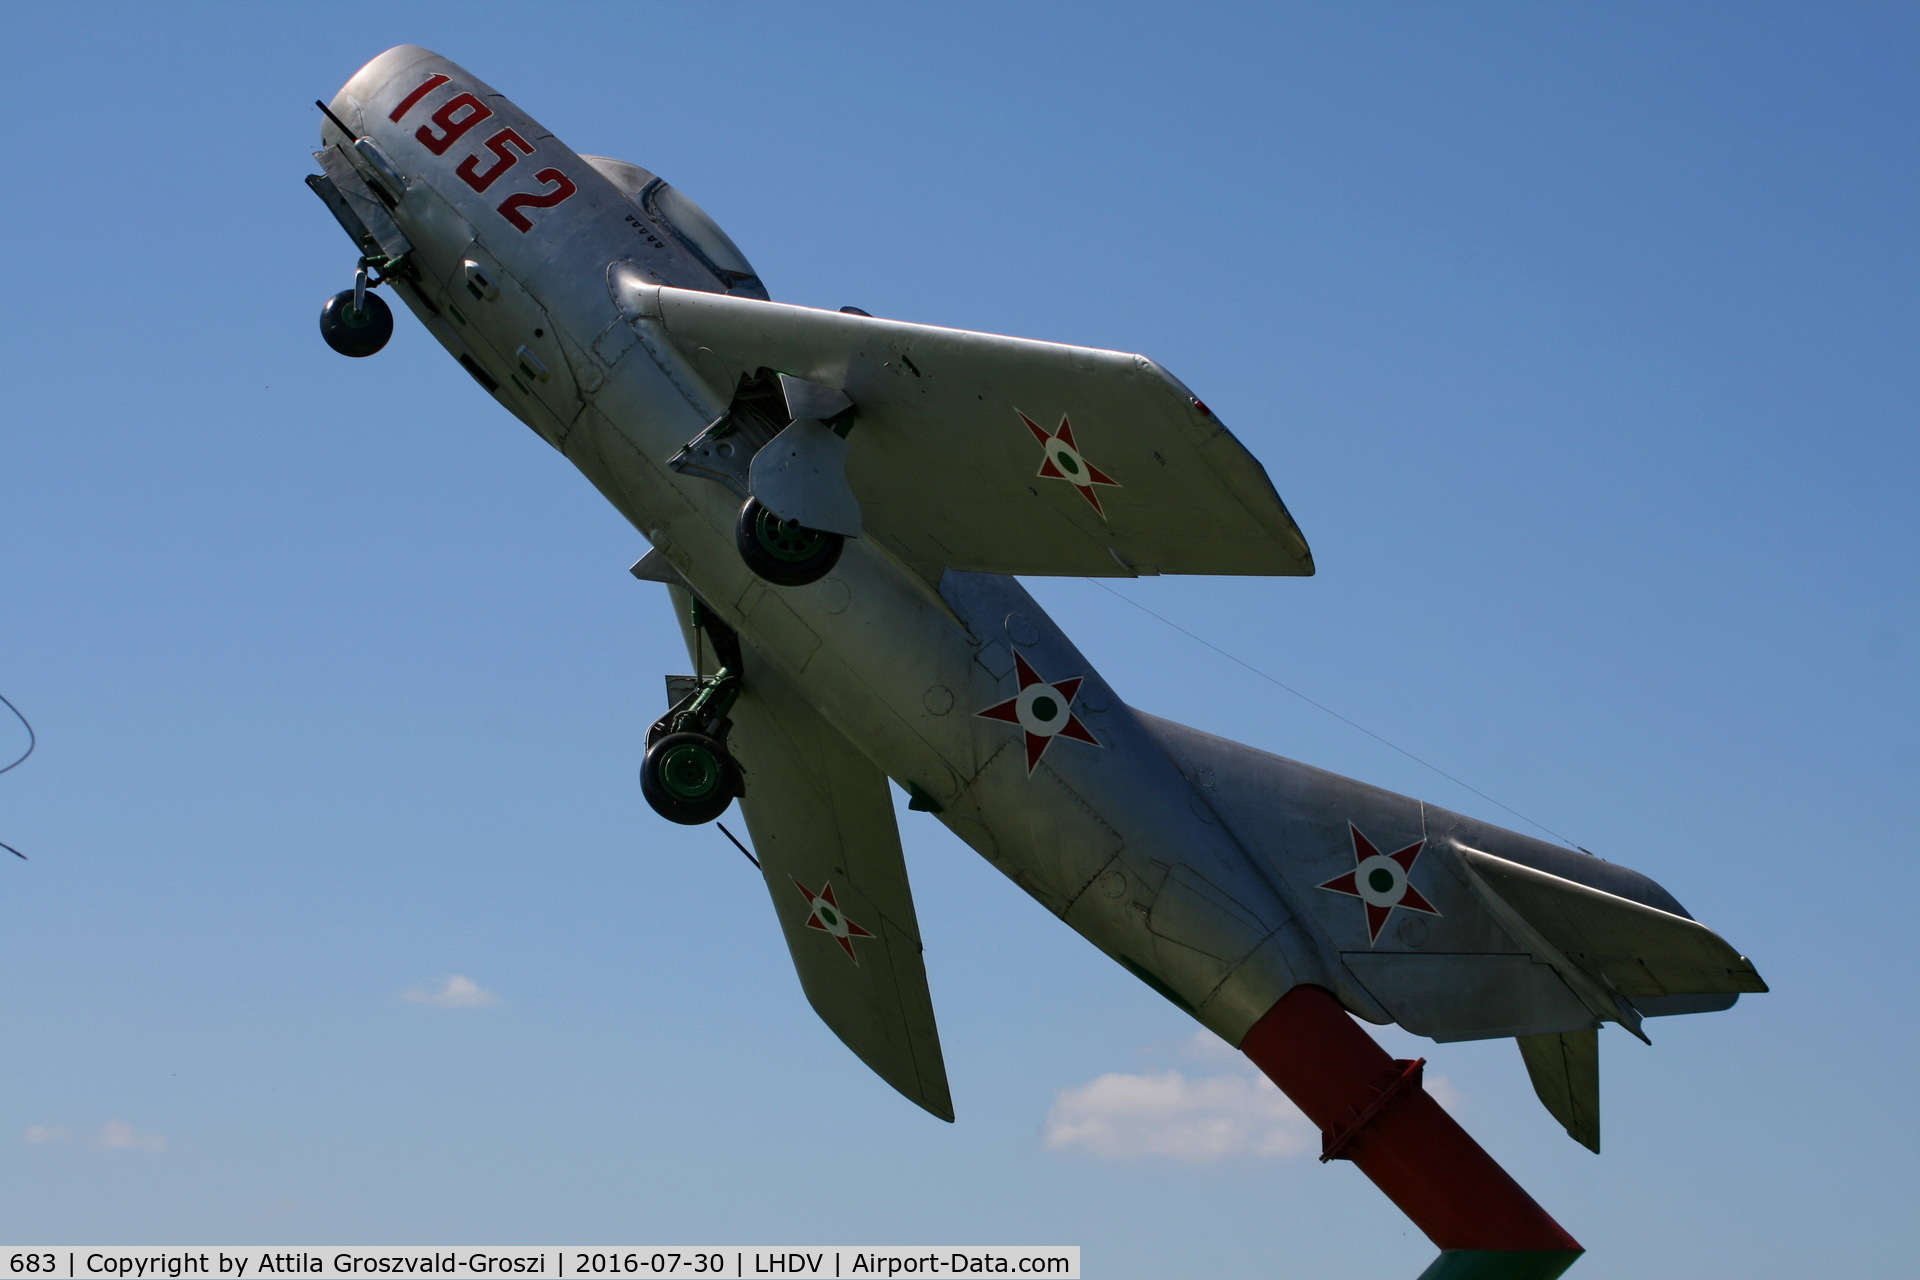 683, 1962 Mikoyan-Gurevich MiG-15 bis C/N 2683, They scrapped, issued after the airport in Dunaújváros